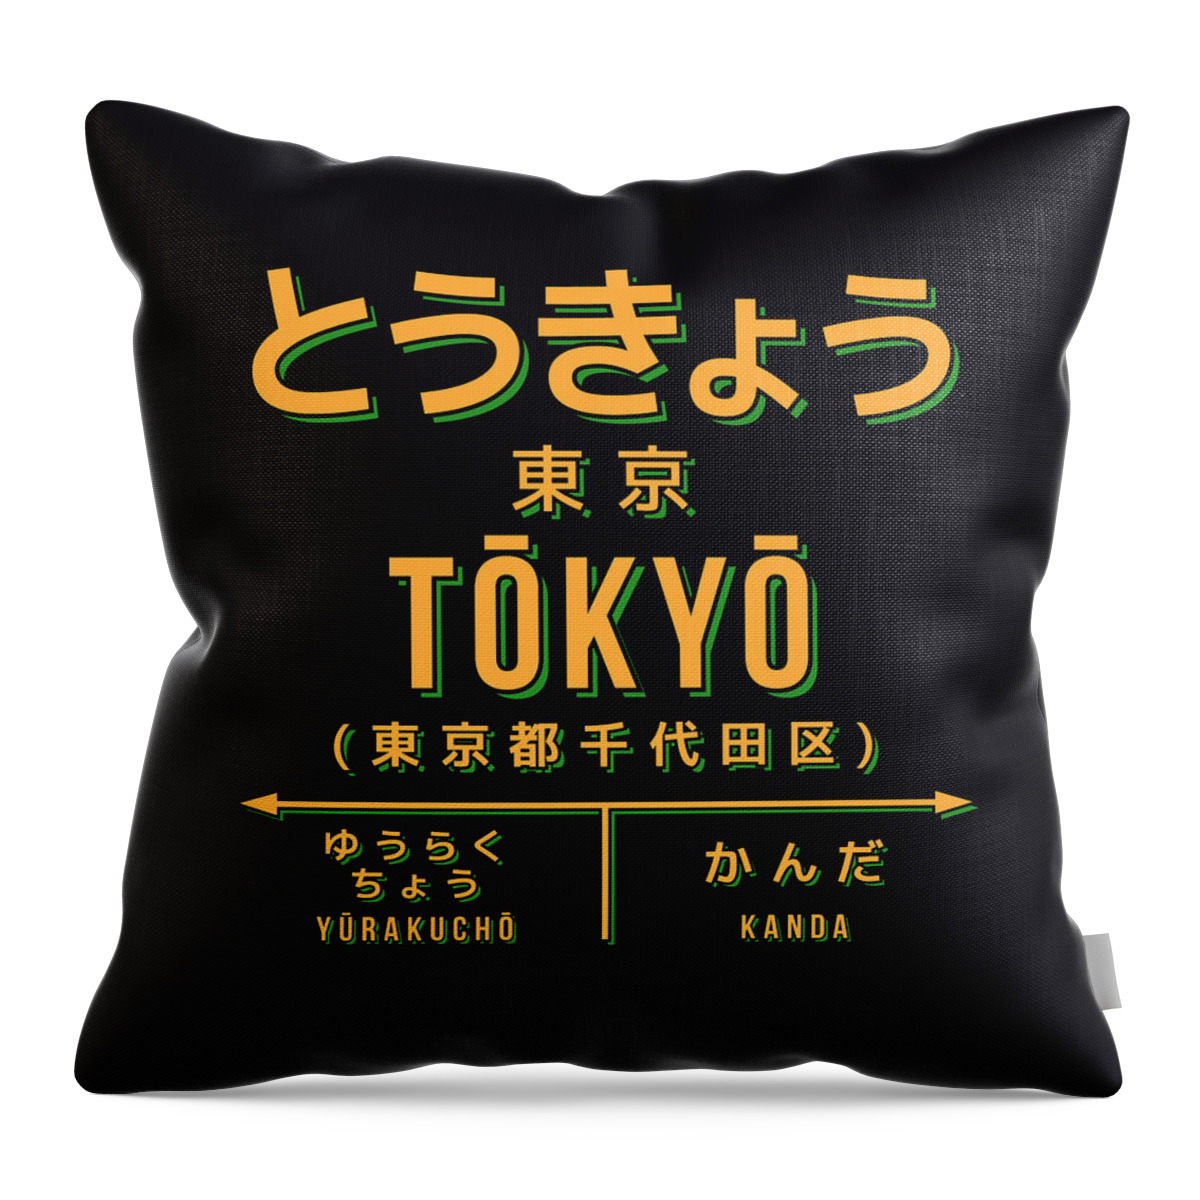 Japan Throw Pillow featuring the digital art Vintage Japan Train Station Sign - Tokyo City Black by Organic Synthesis